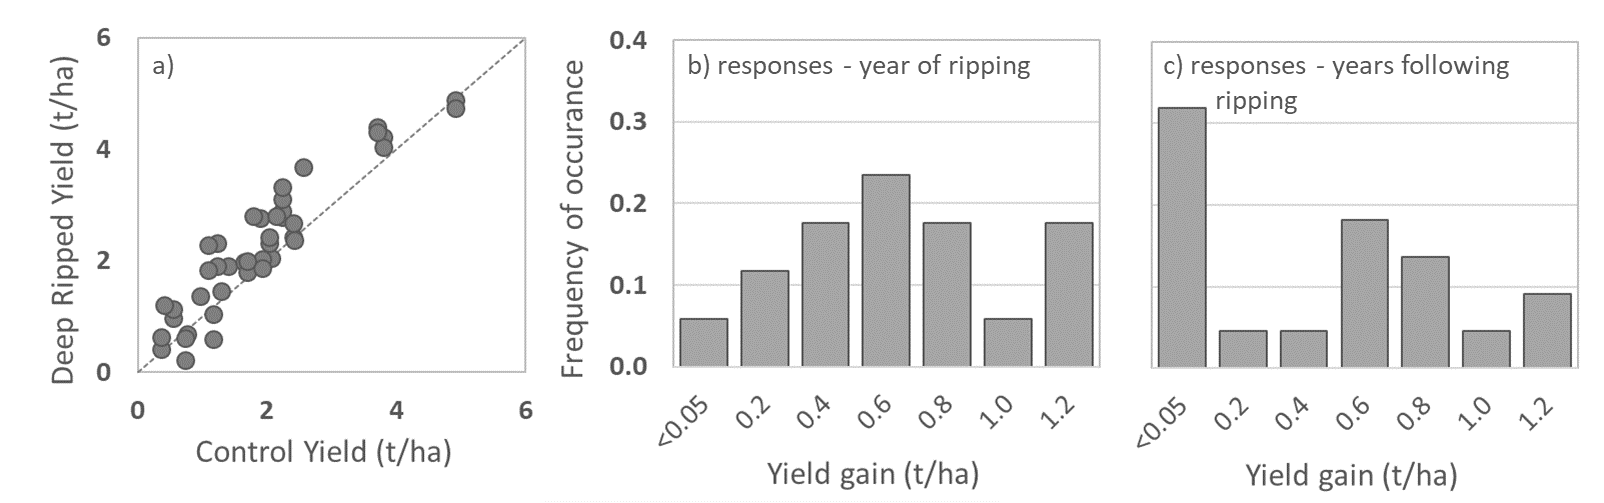 Figure 1 is a scatter graph and two column graphs showing annual crop yield (t/ha) responses to deep ripping in sands where physical issues are considered dominant including a biplot of unmodified control yields Vs deep ripped yields (a); frequency distributions of yield gains (ripped yield – control yield) in the year of ripping (b) and distribution of yield gains in subsequent years following ripping (c). Data represent treatment averages across seven CSP00203 research trials (multiple years, n=4) and two validation trials (single year, n=3) with a total of 40 response years.